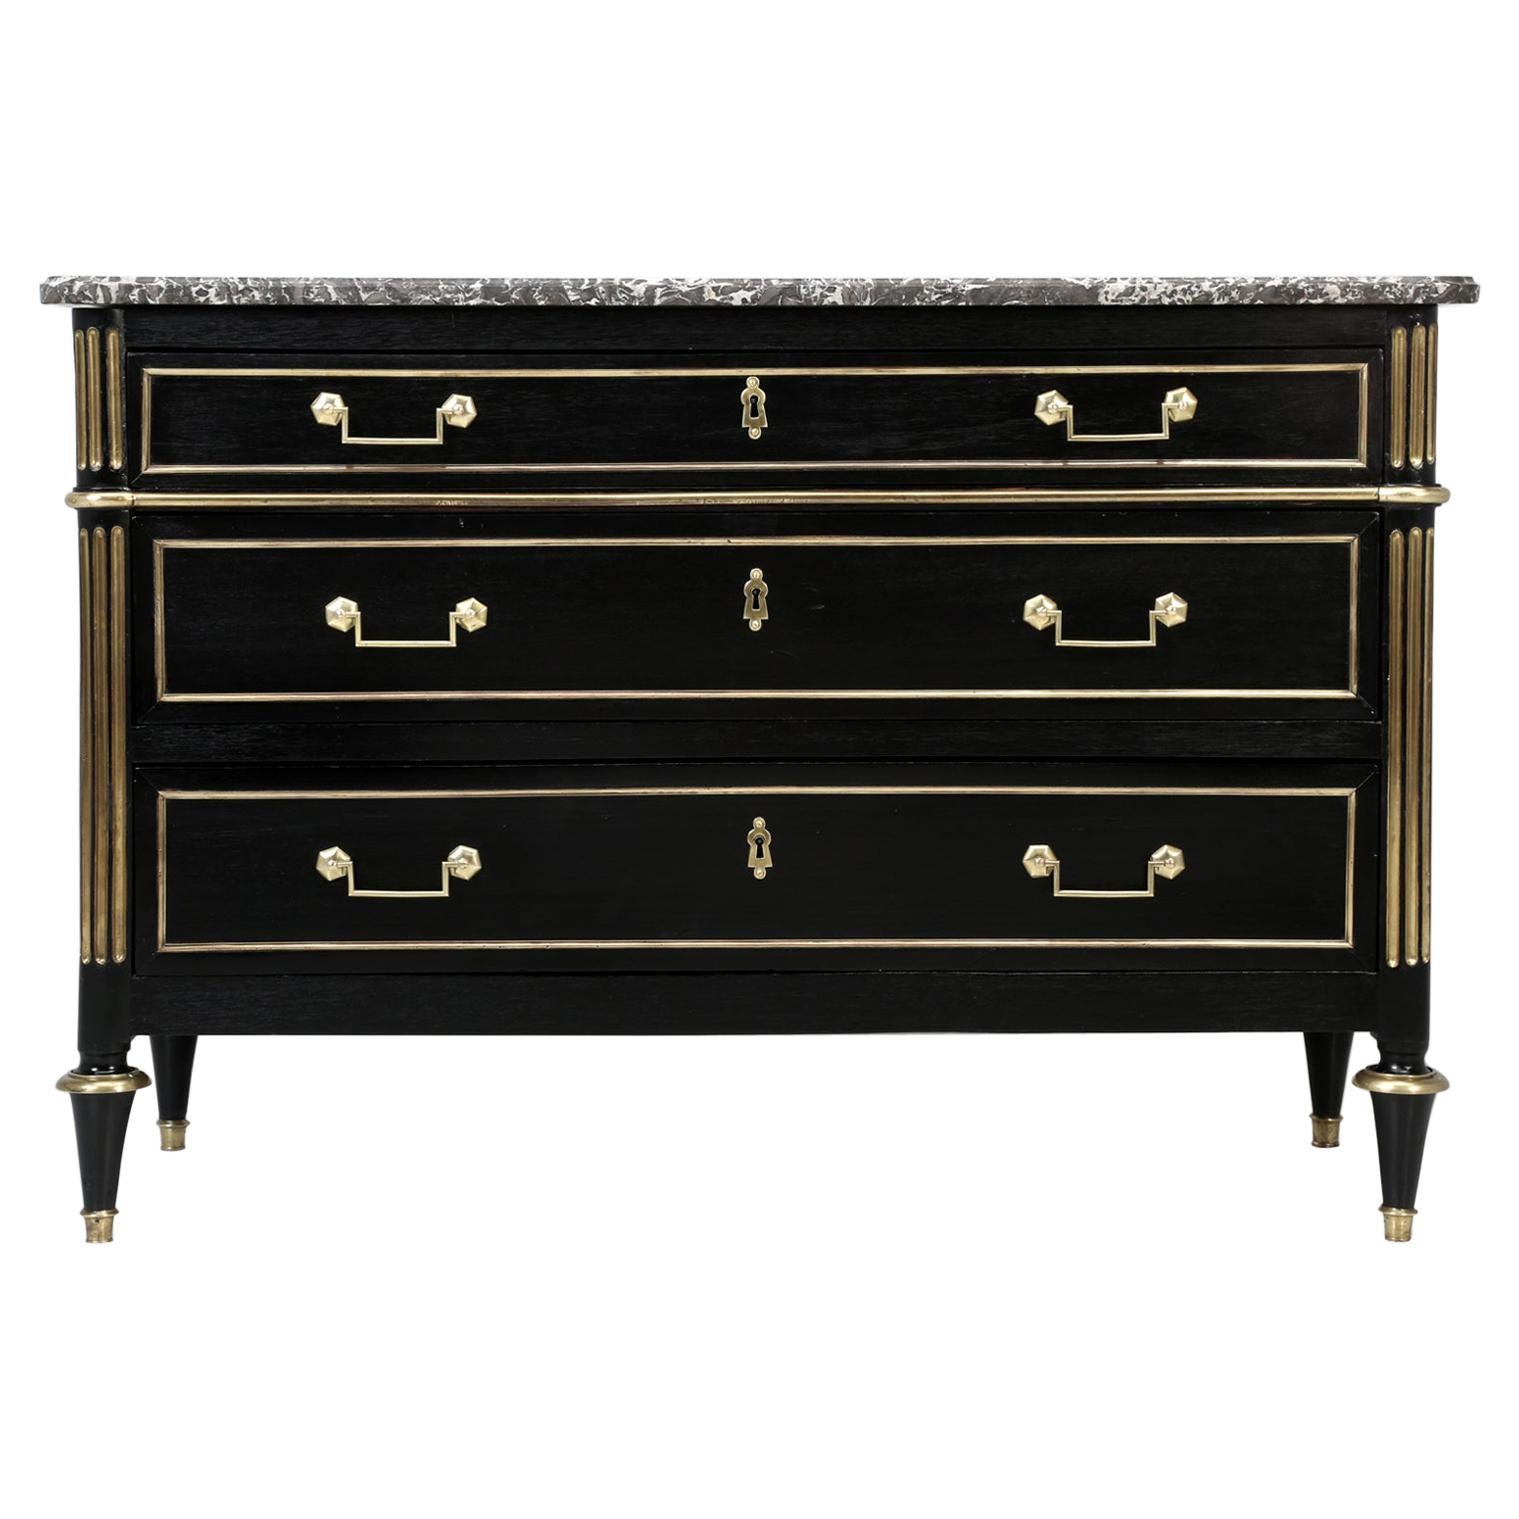 Antique French Louis XVI Style Commode, Ebonized with Marble Top Fully Restored